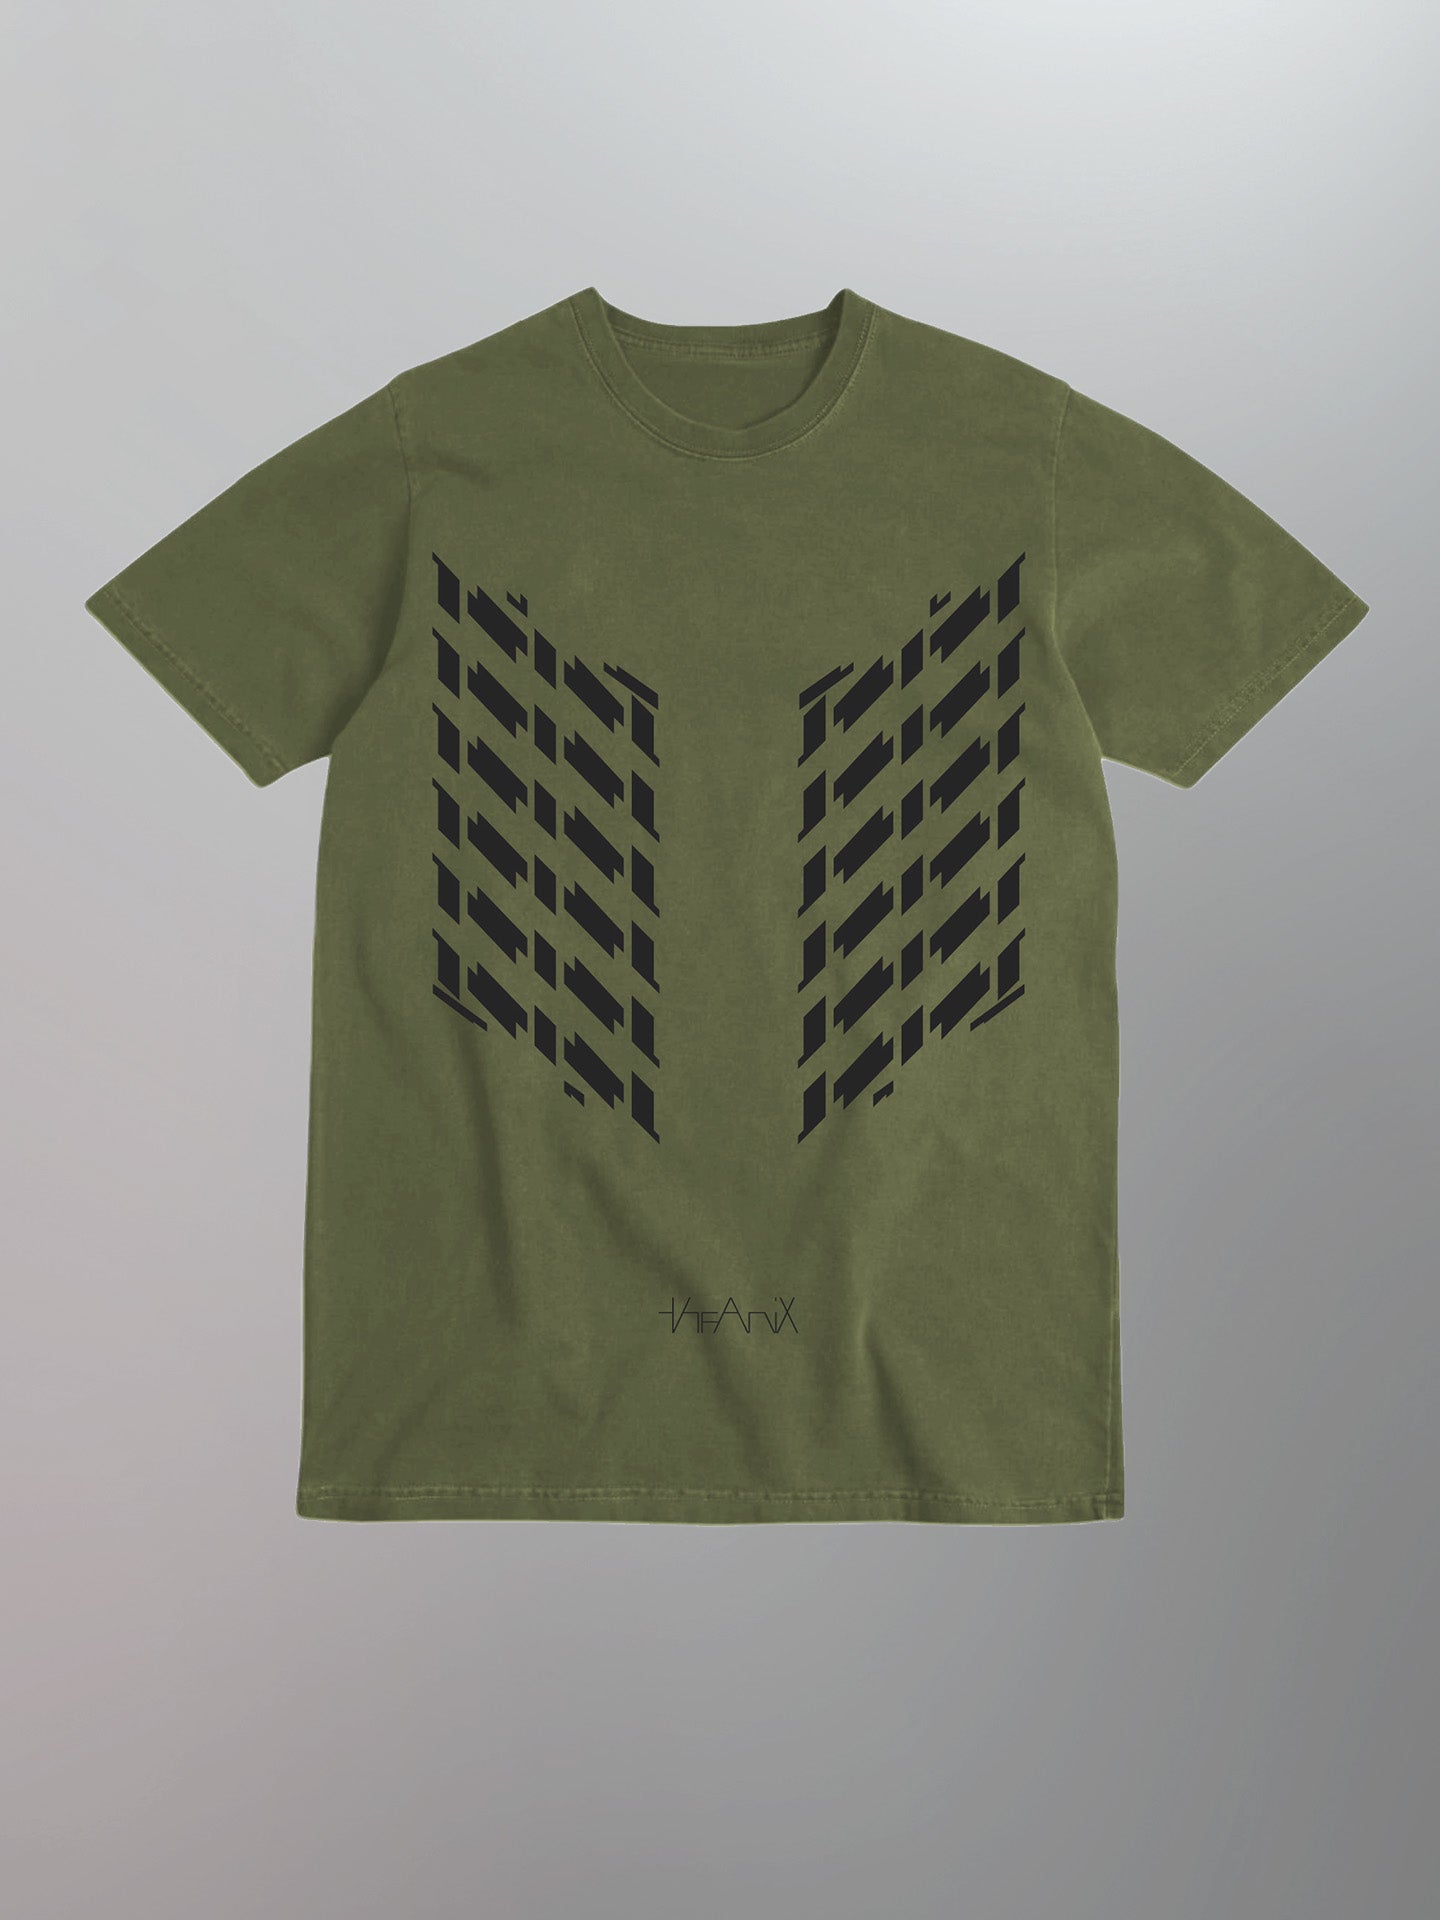 The Anix - Dazzle Shirt [Limited Edition Military Green]